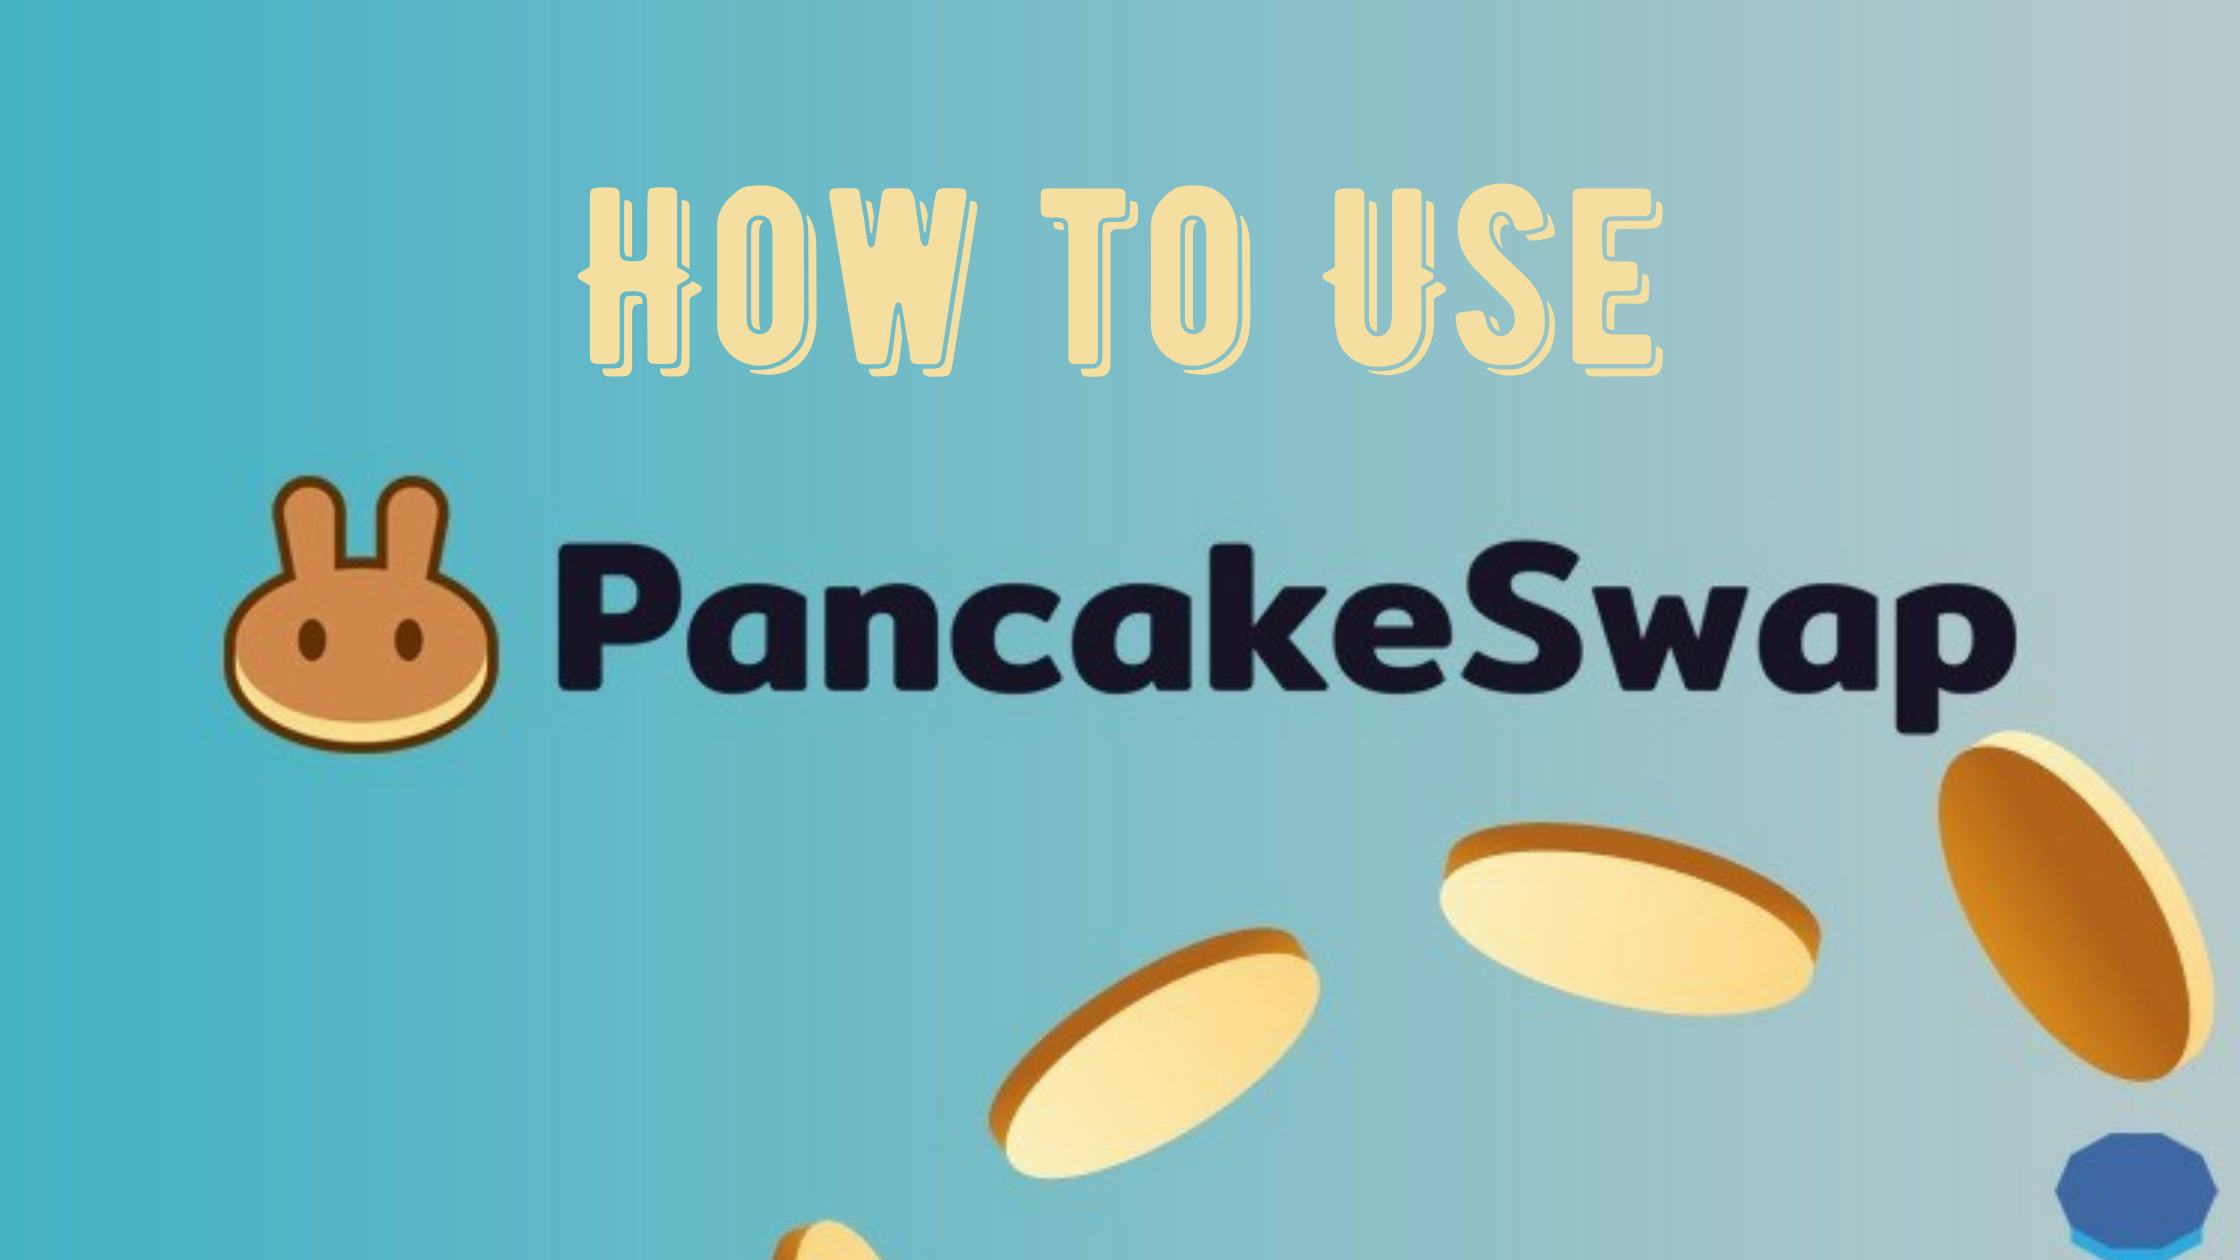 How to Use Pancakeswap: A Detailed Beginners Guide